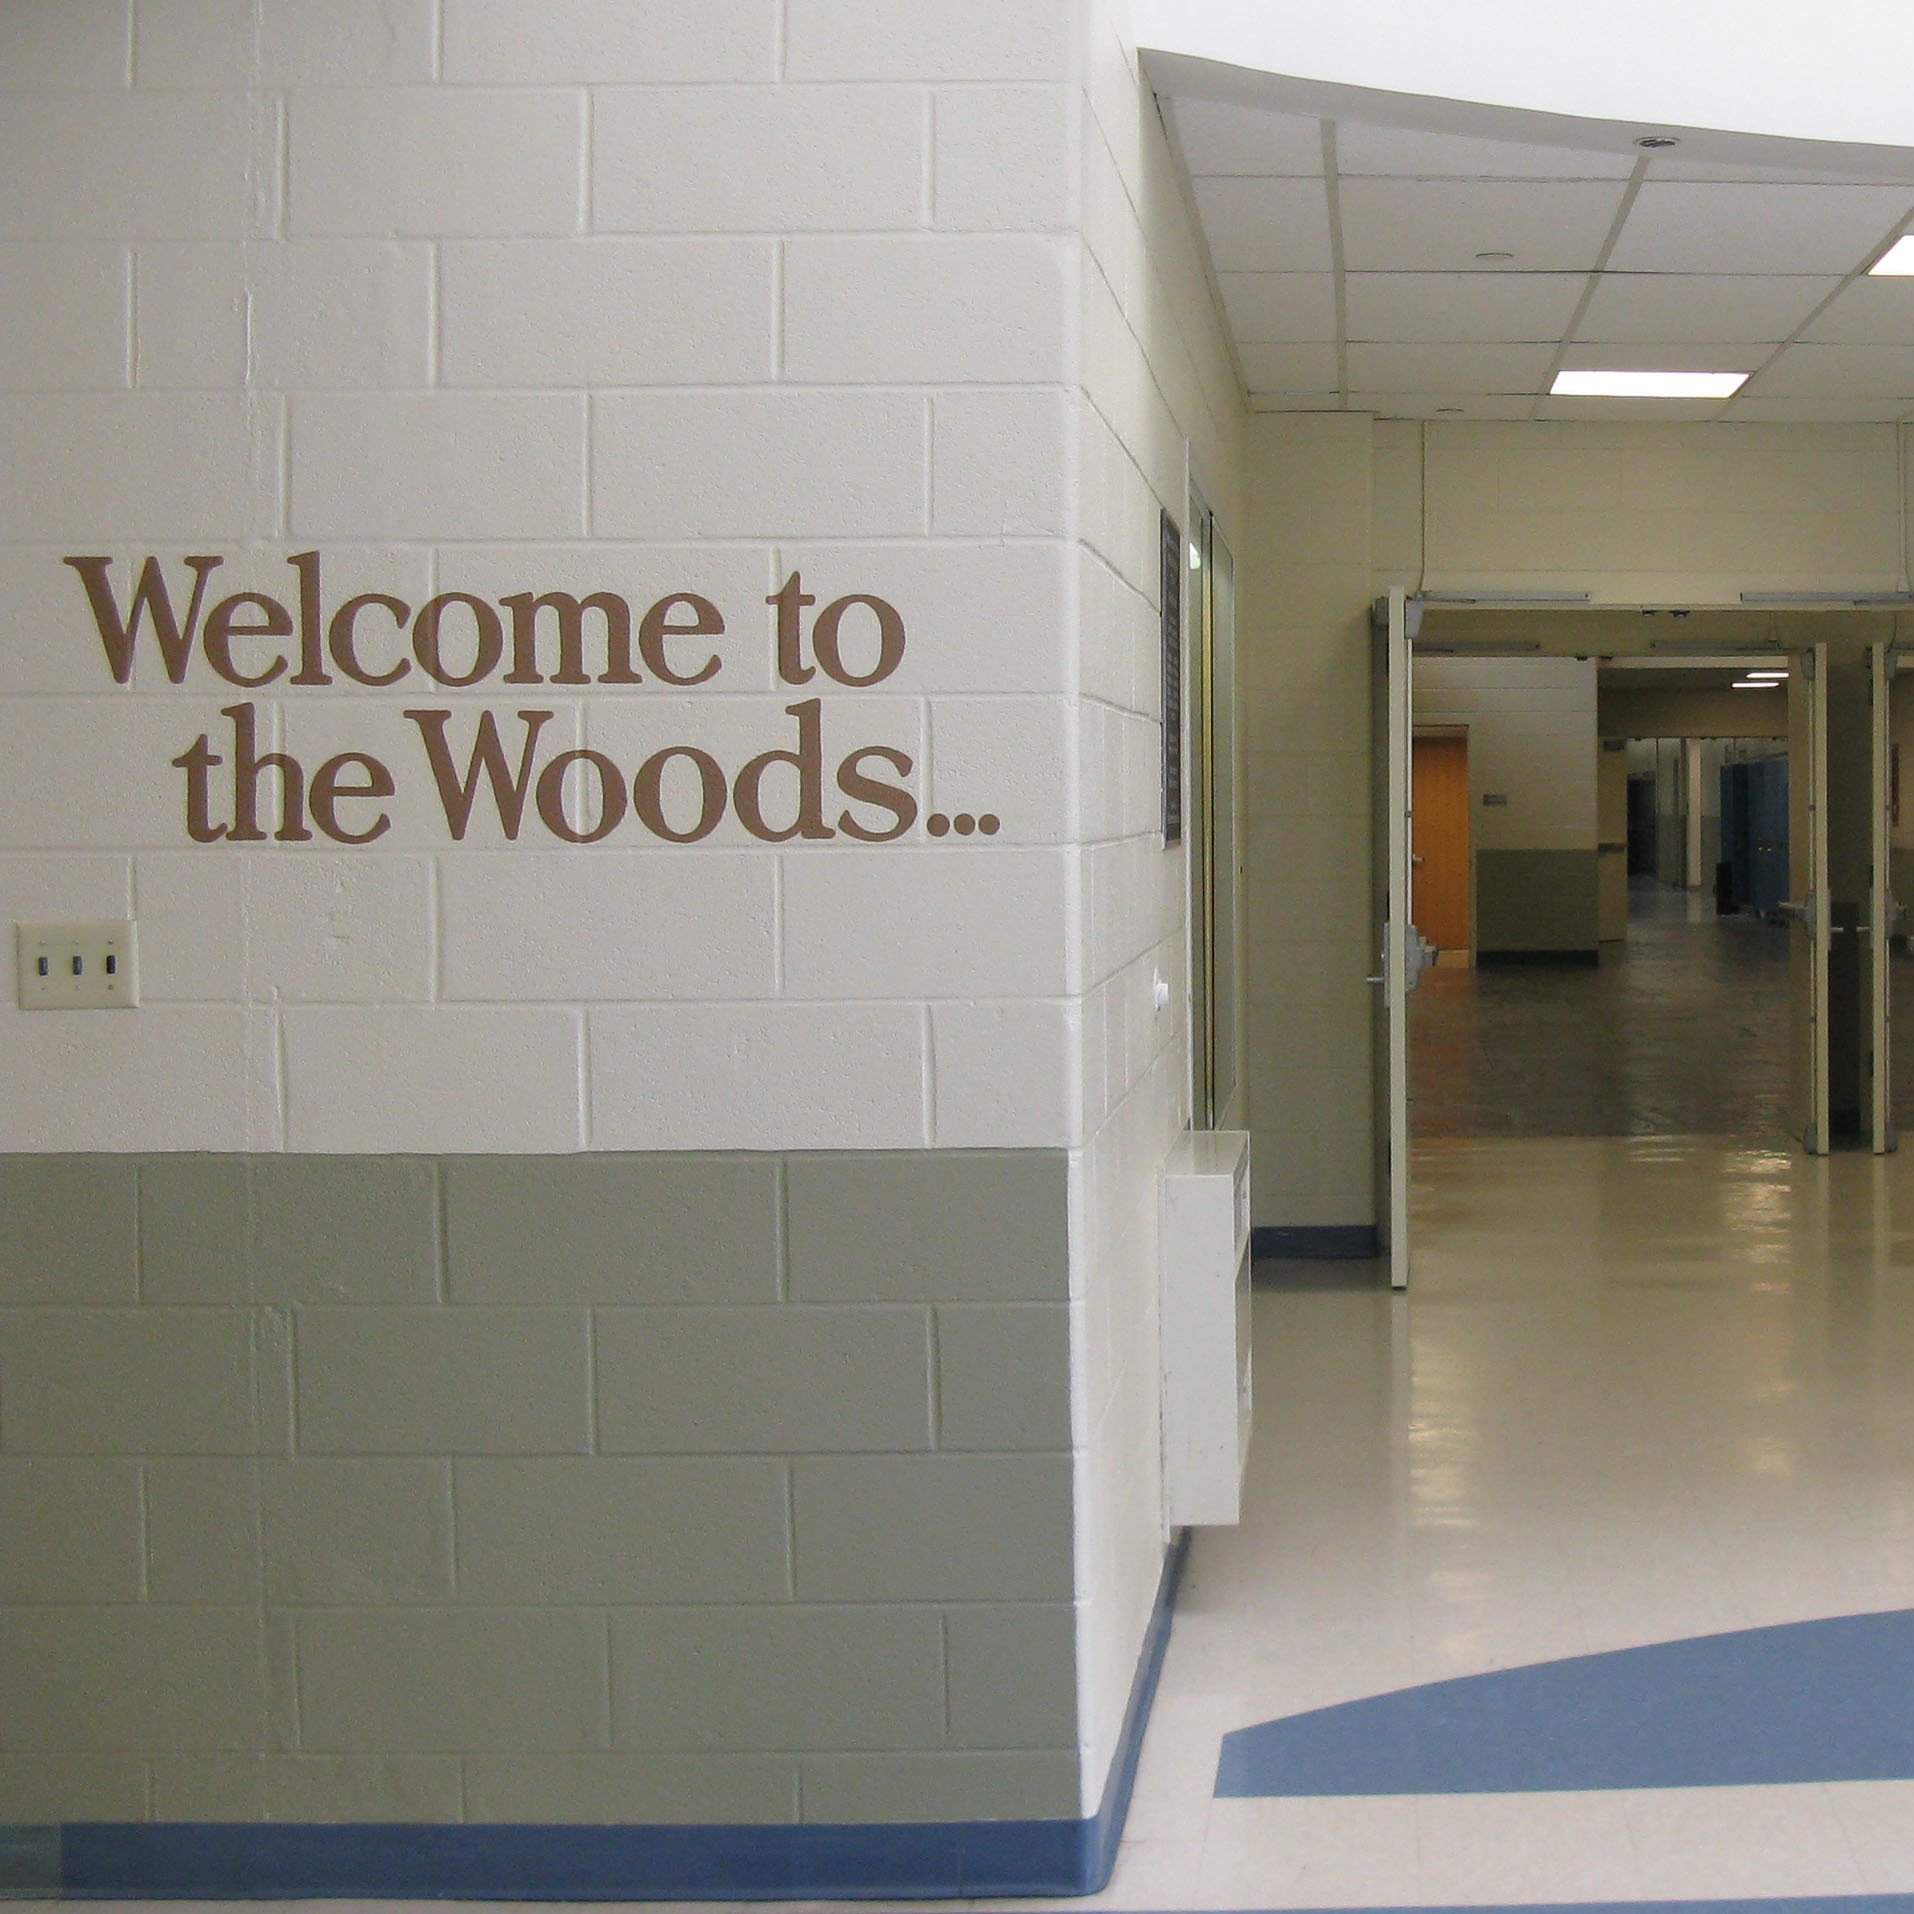 Fairfield Woods Middle School is a public school for students in grades six through eight, in Fairfield, Connecticut.